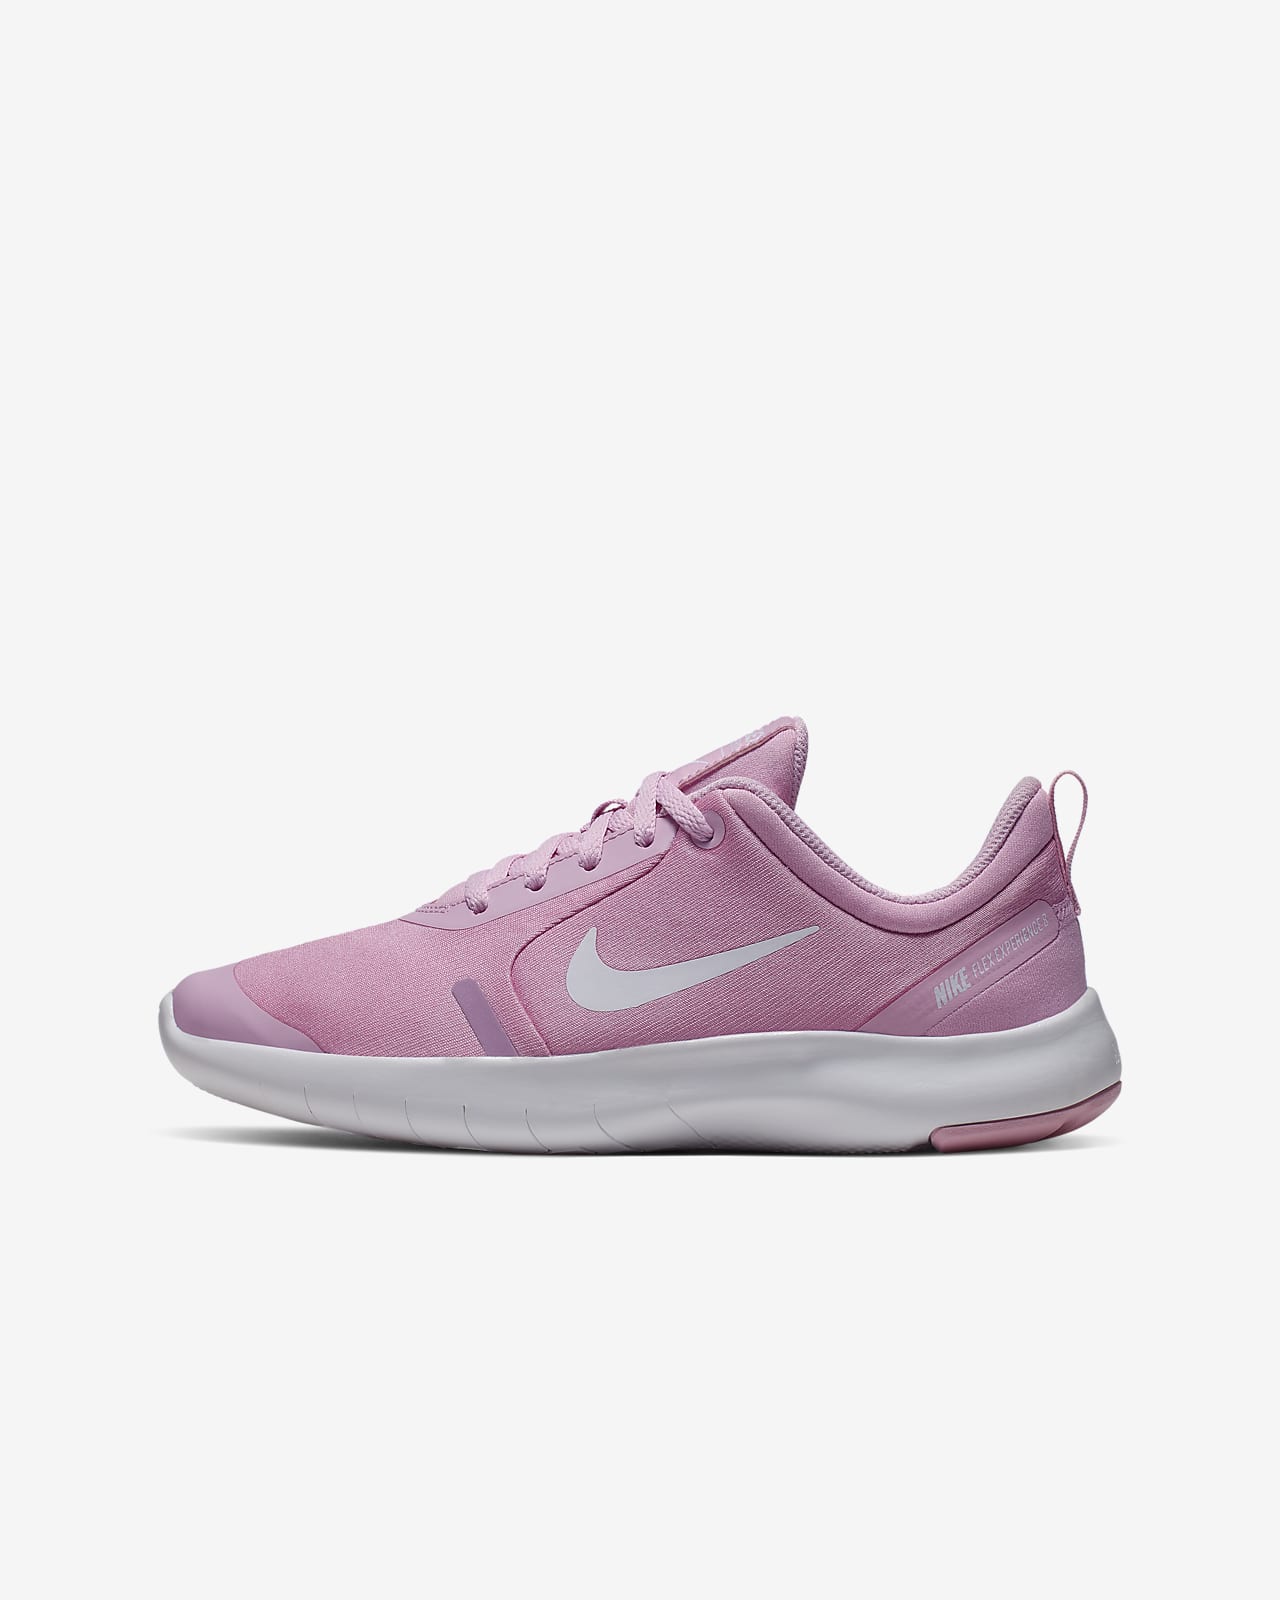 nike youth running shoes